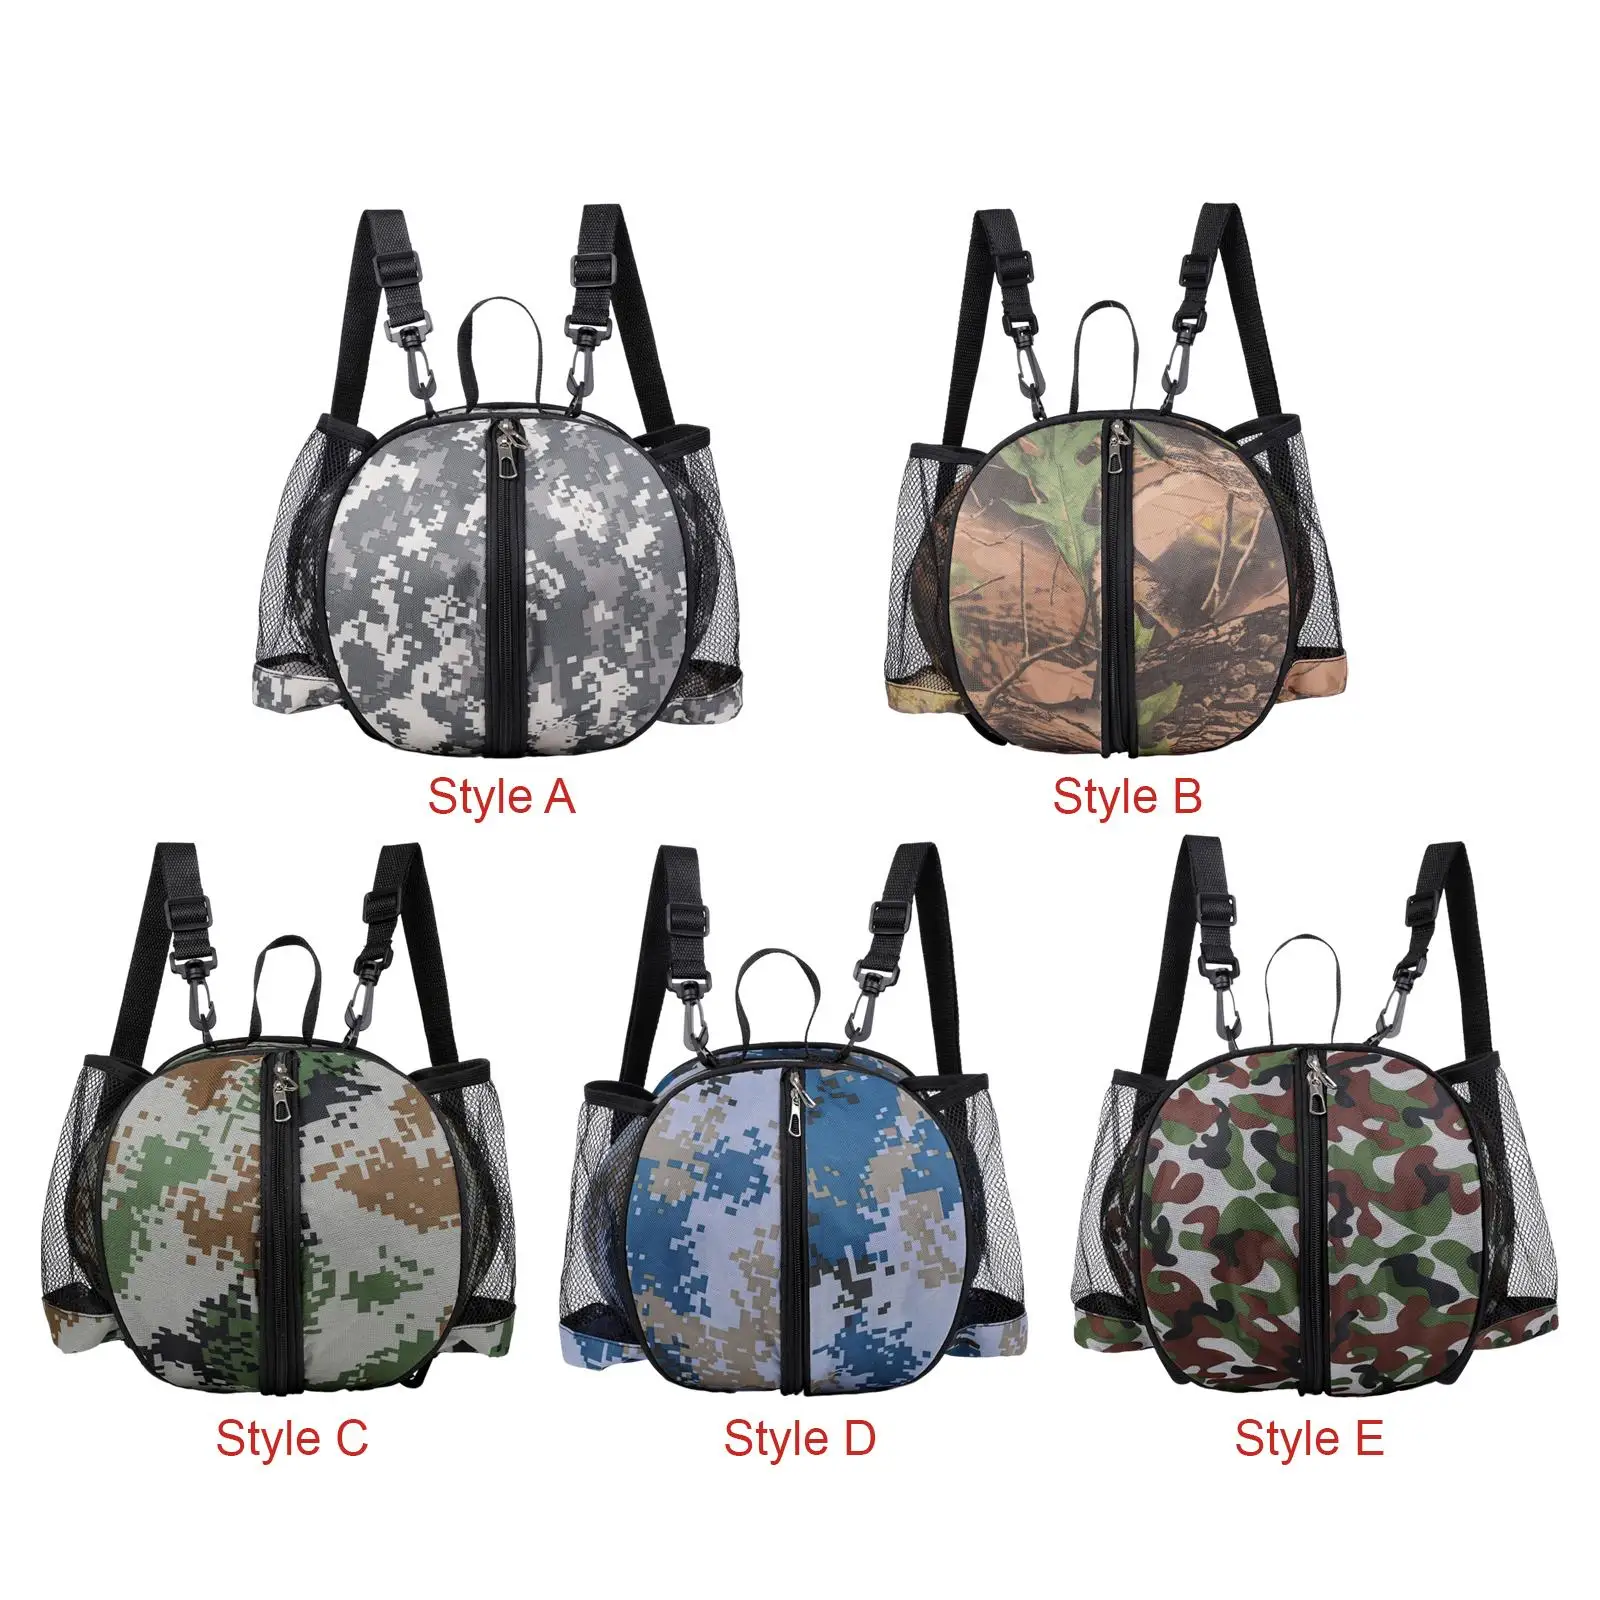 Portable Basketball Shoulder Bag Backpack Basketball Tote Bag , Also for Storing Clothes or Sports Shoes for Boys Girls Durable